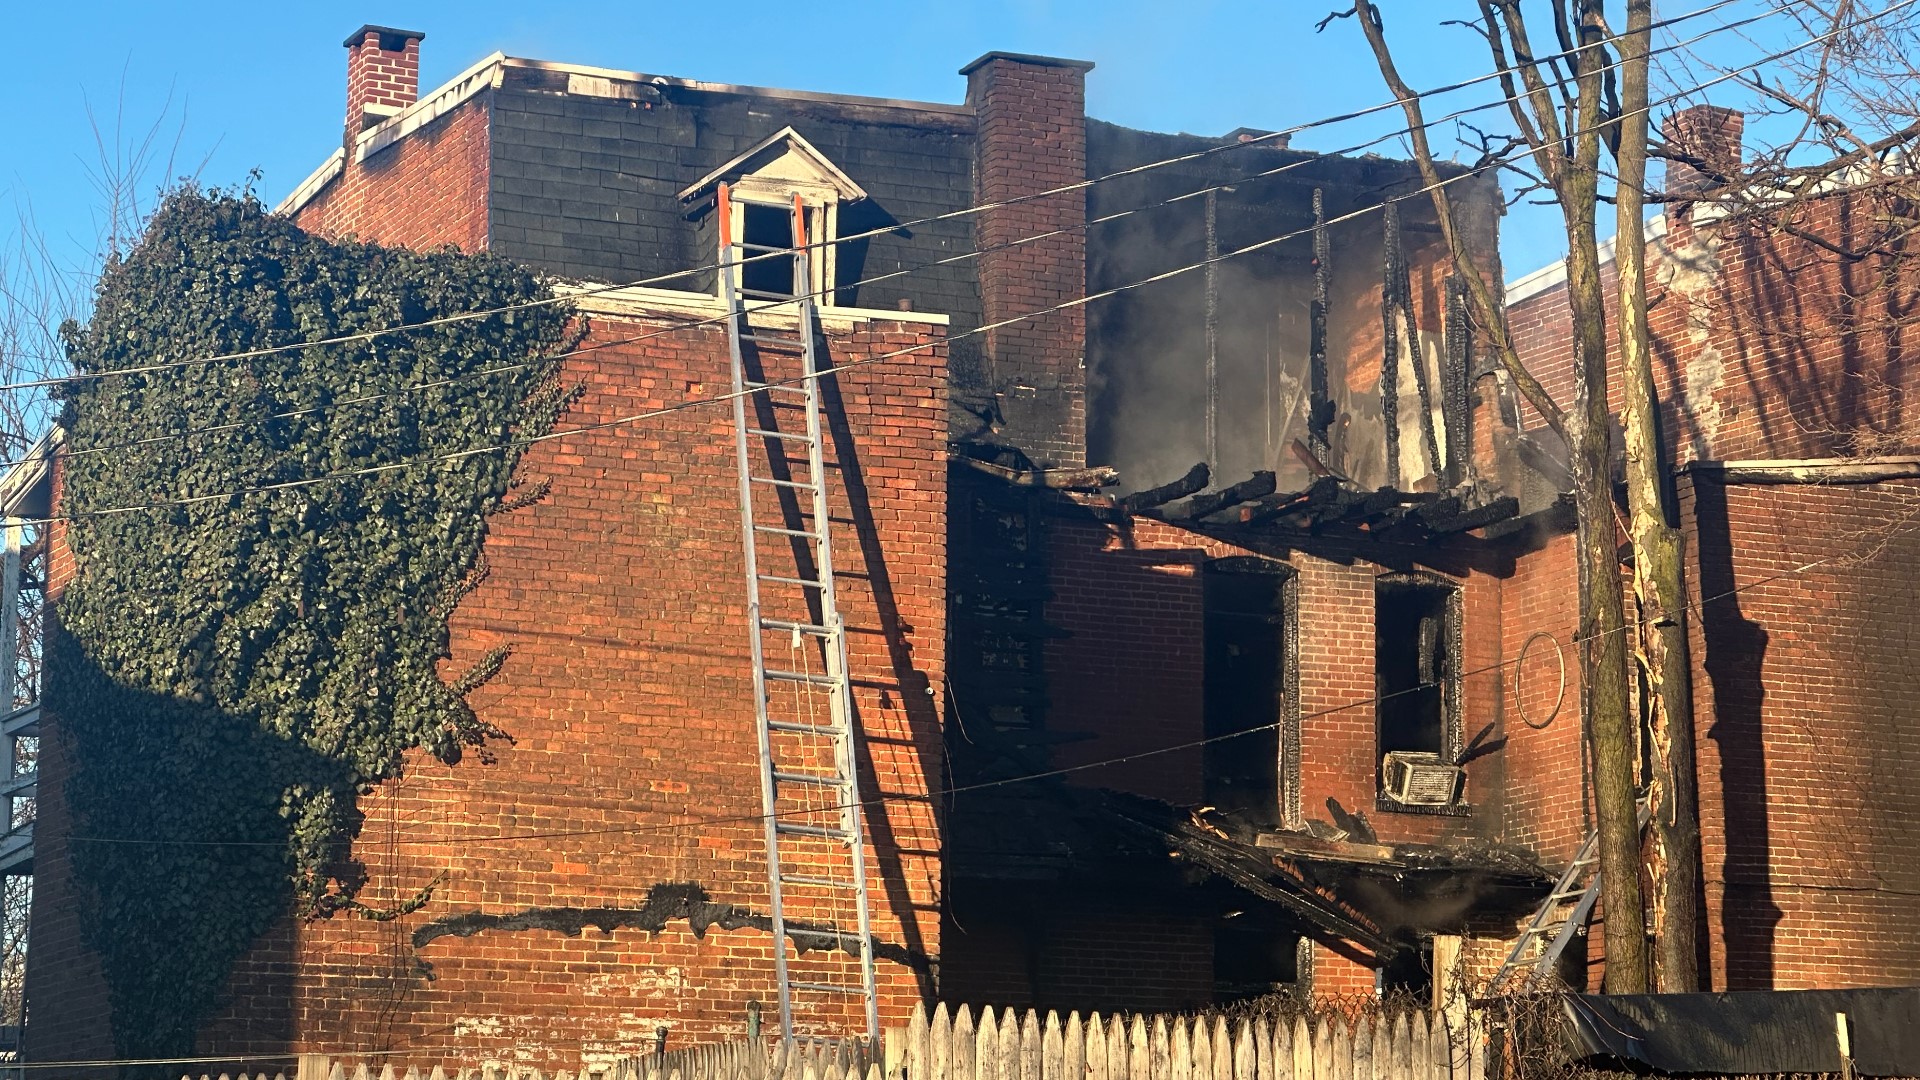 Two women and one man were killed in the fire, according to the York County Coroner's Office.